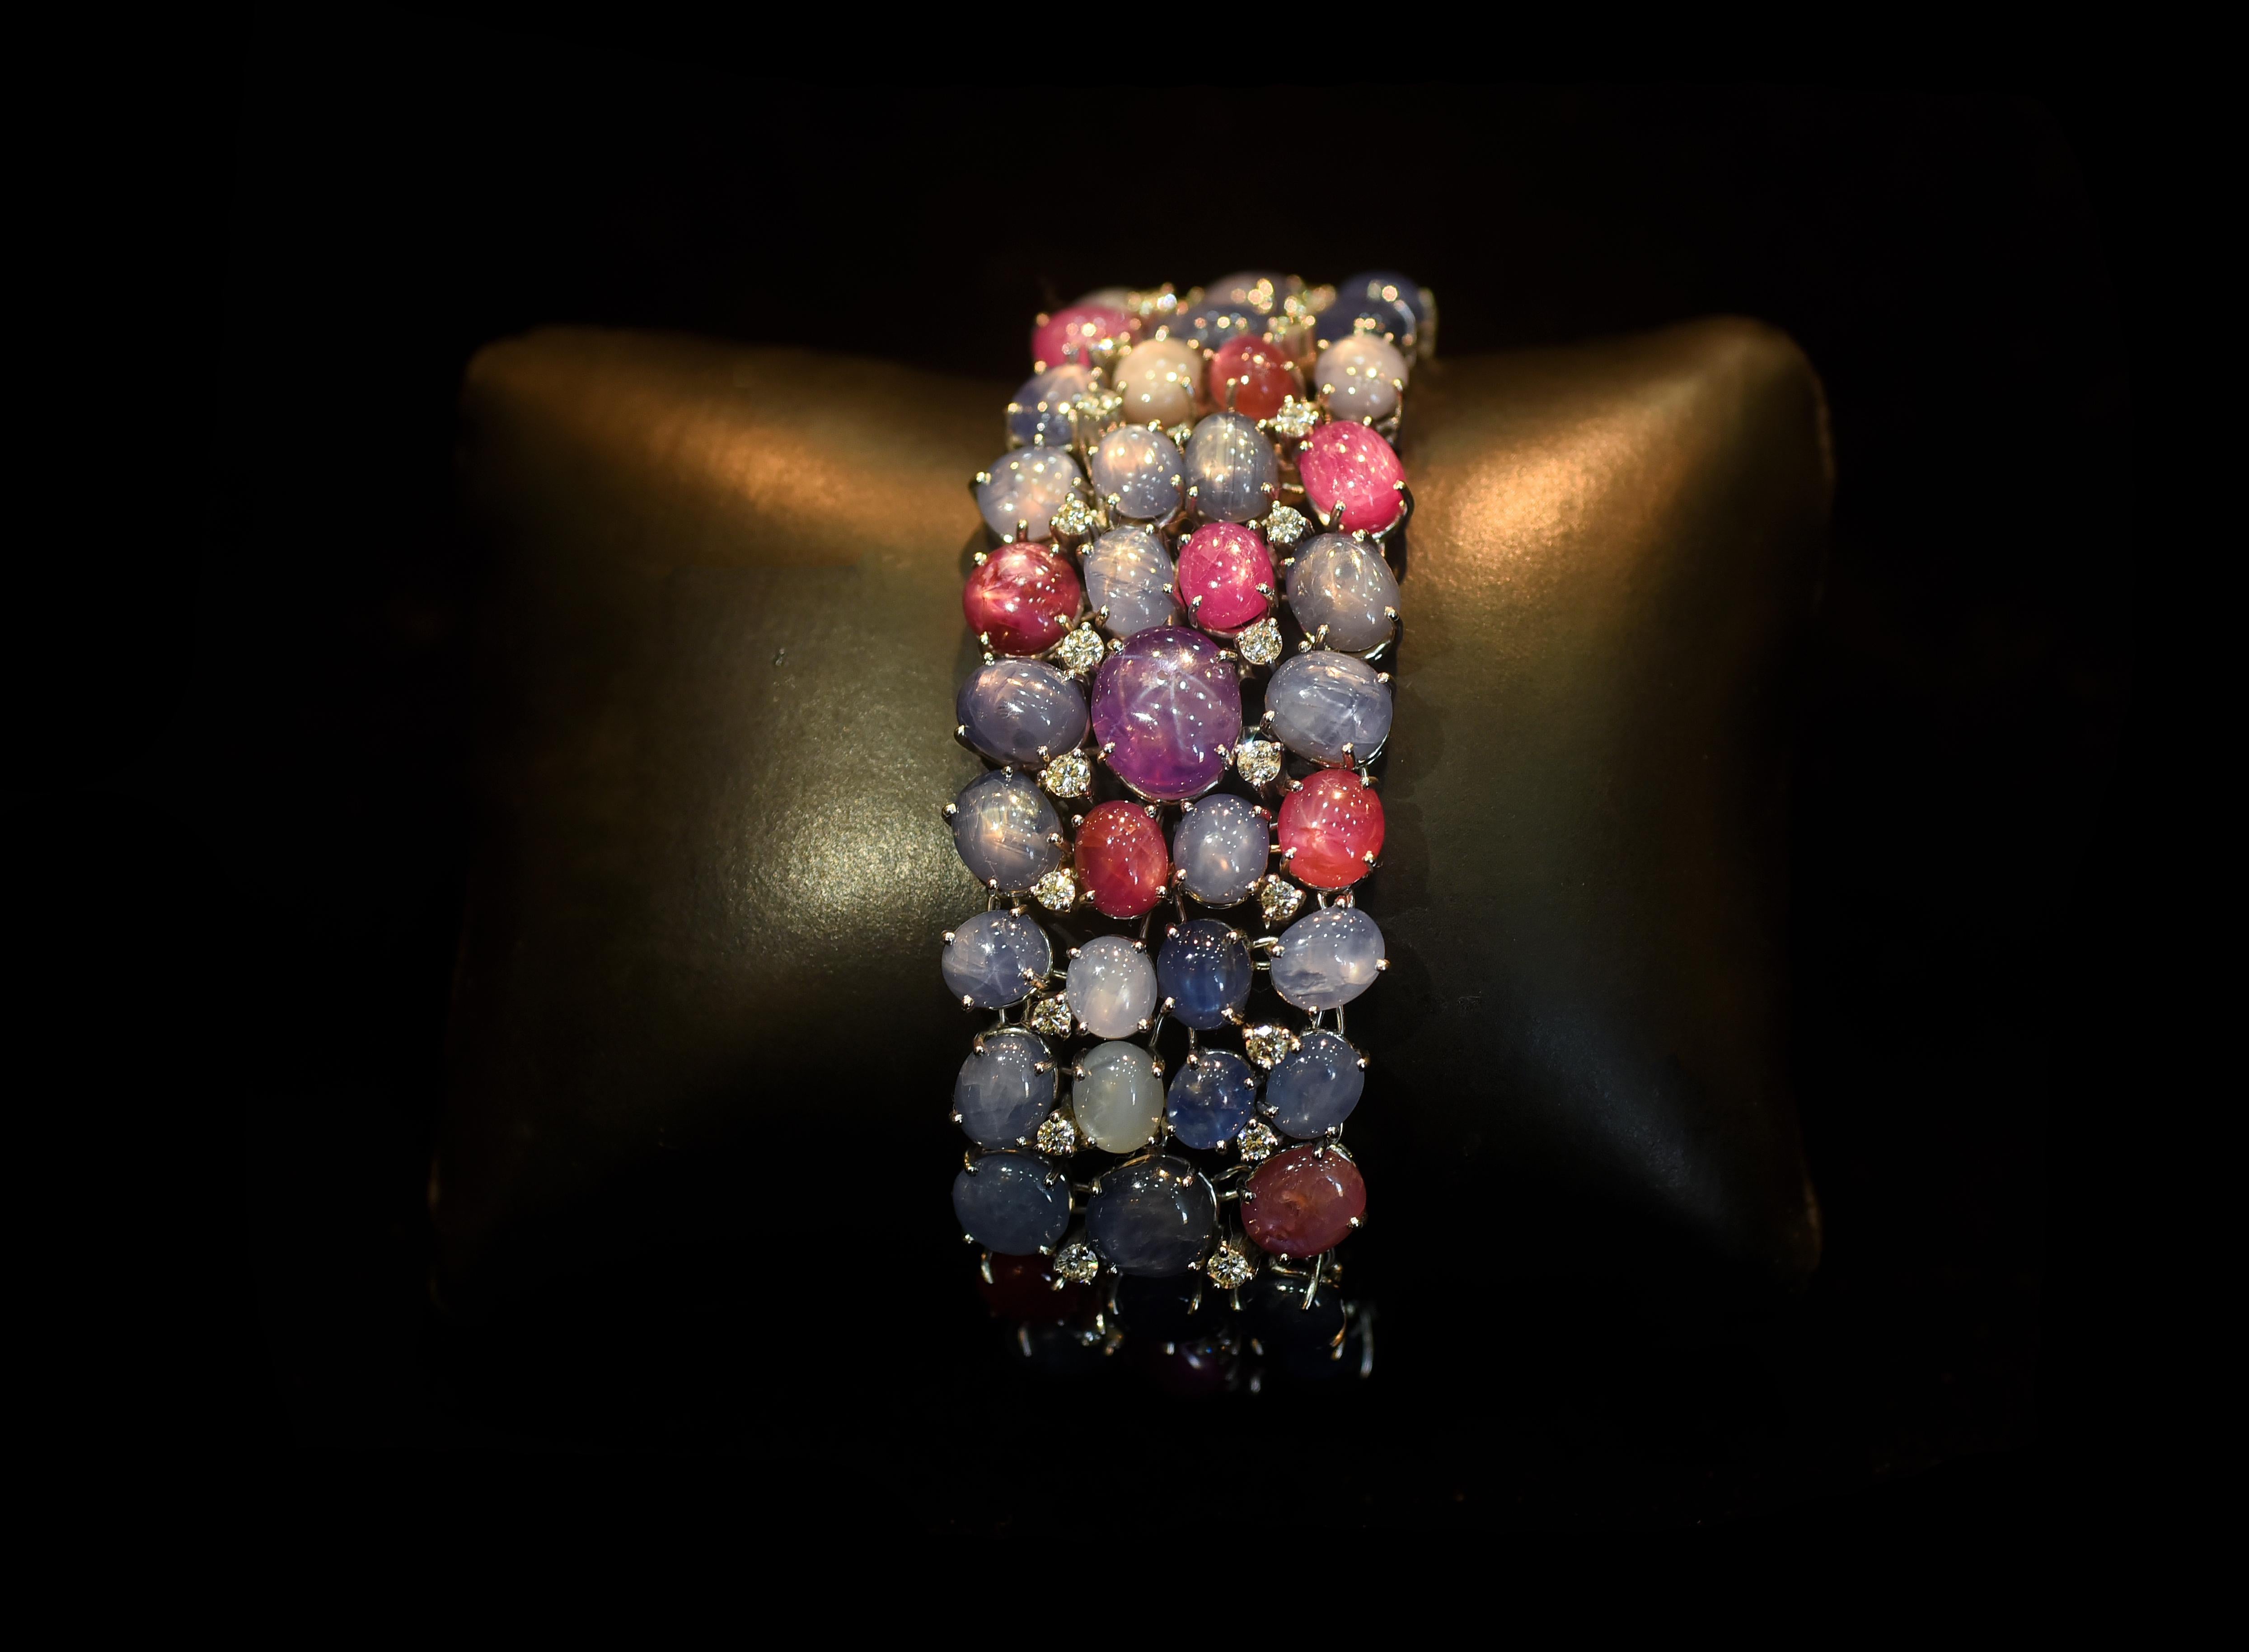 A gorgeous and one of a kind Ceylon Star Sapphire Bracelet set in 18K Gold & Diamonds. Star Sapphire is a rare rarity of Sapphire that exhibits a rare asterism (a six-rayed star) floating across the stone under specific lighting. The Star Sapphire